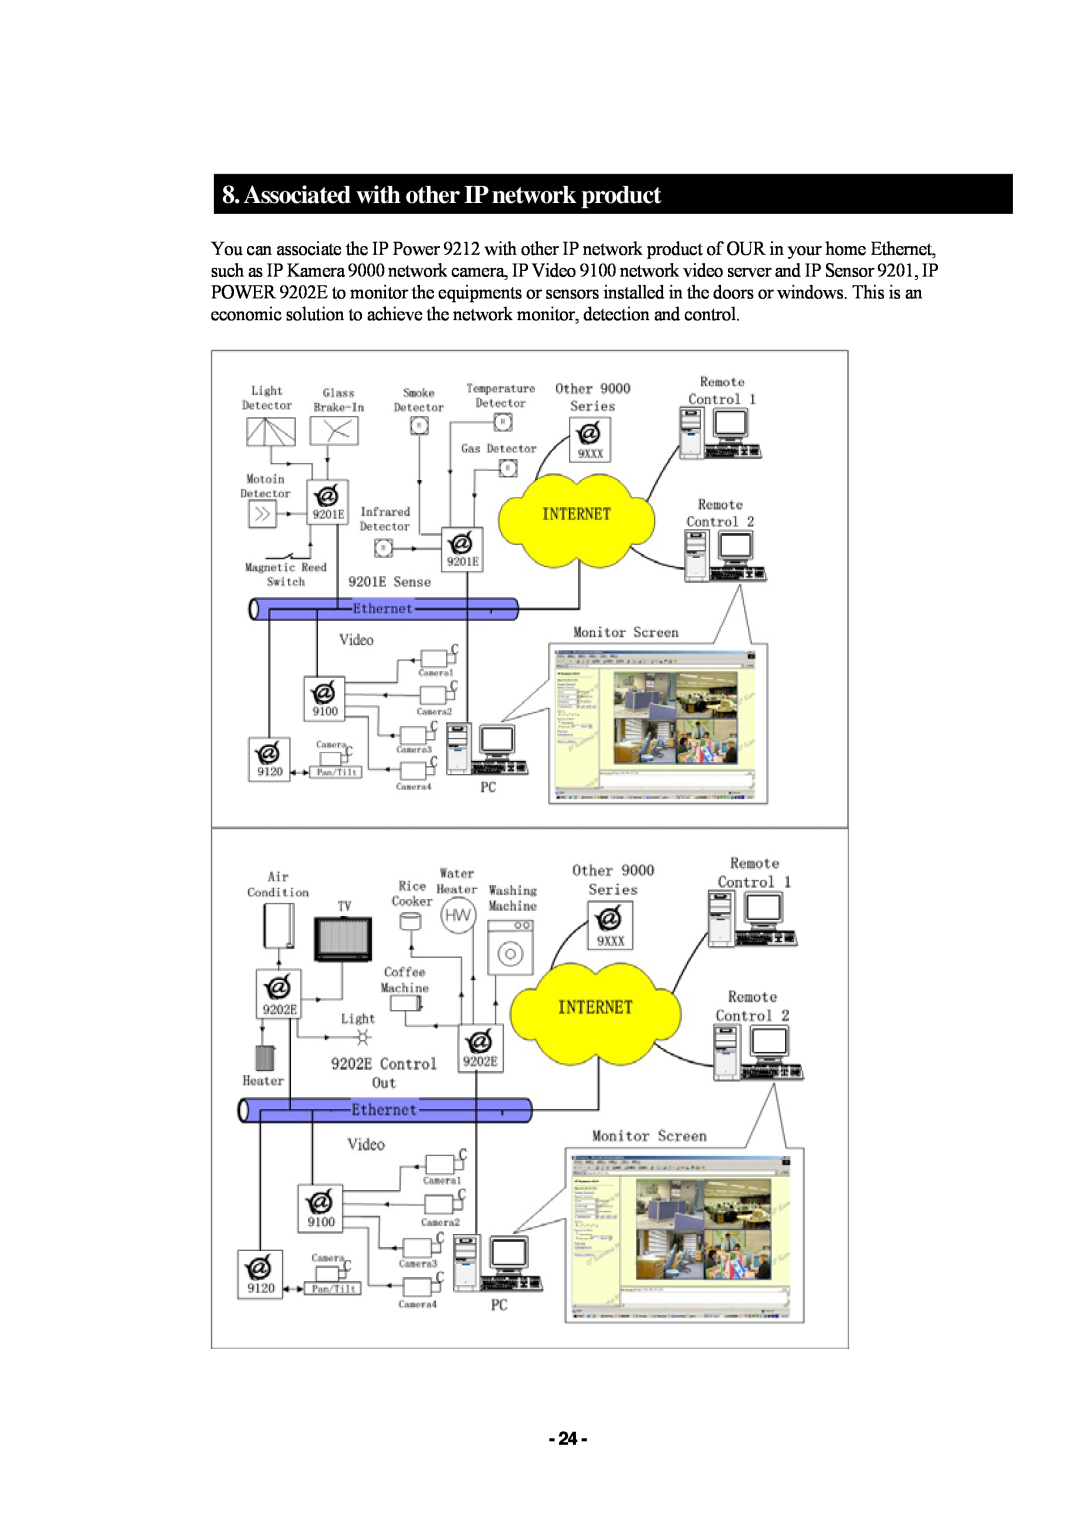 New Media Technology 9212 manual Associated with other IP network product 